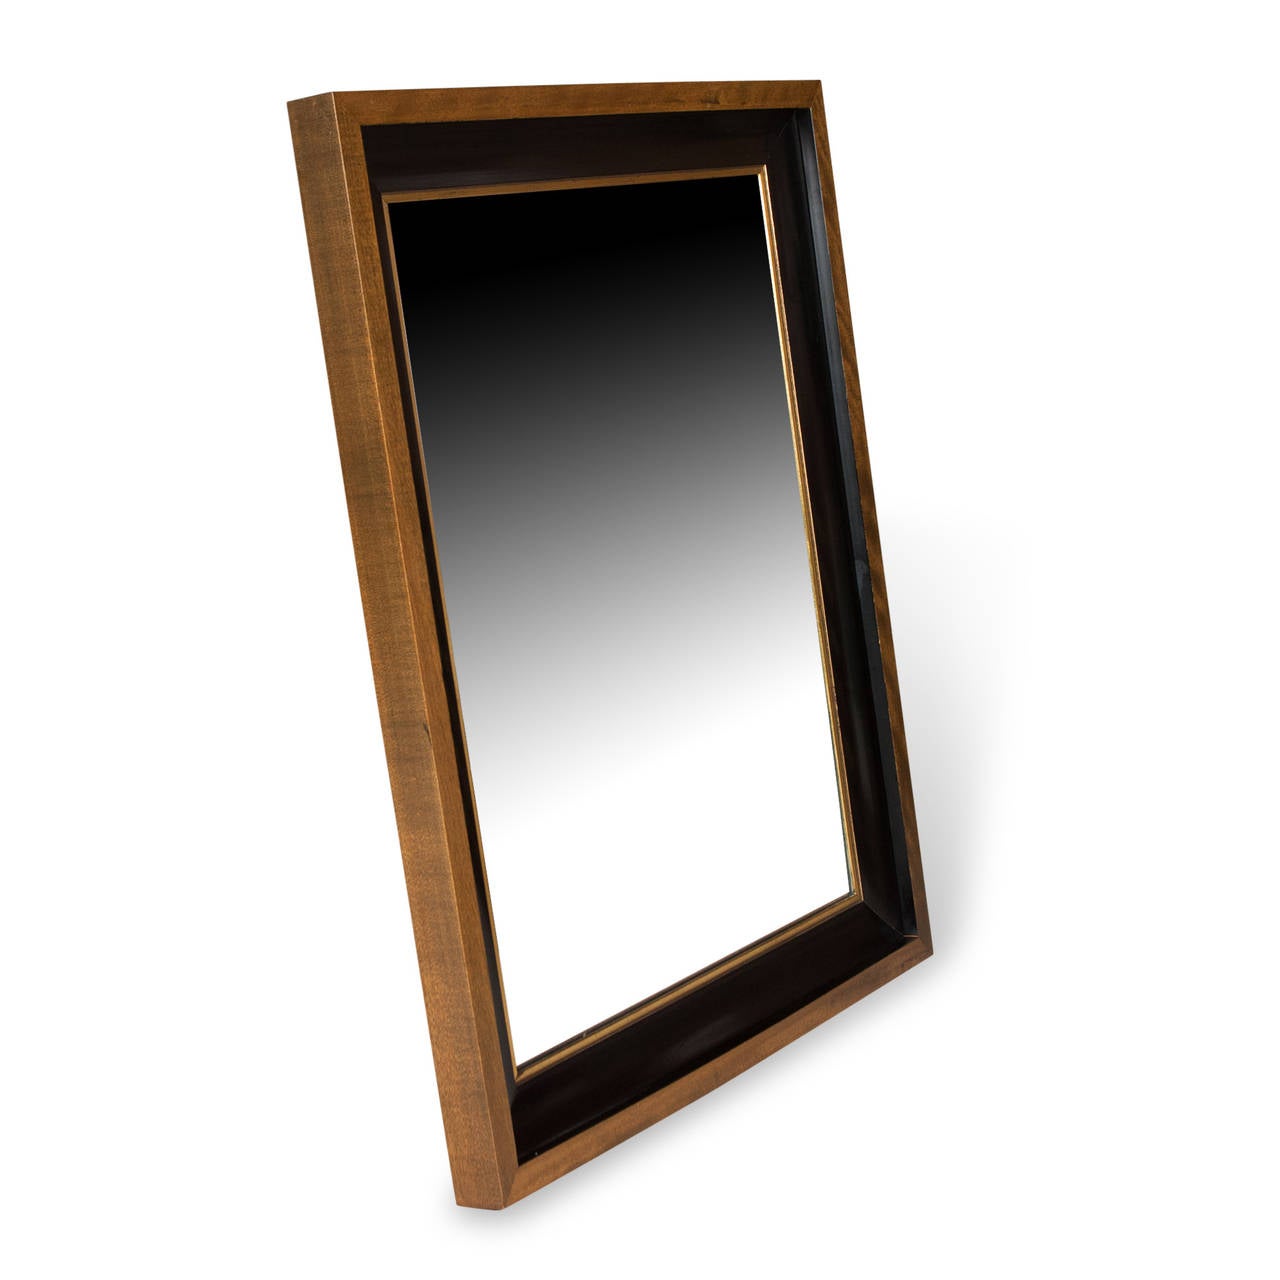 Mahogany and ebonized rectangular frame mirror, outer mahogany border with ebonized curved well, giltwood detail surrounding mirrored glass, American, 1960s. Measures: Height 27 in, width 23 in and depth 1 3/4 in. (Item #2308)

Note: Minor age